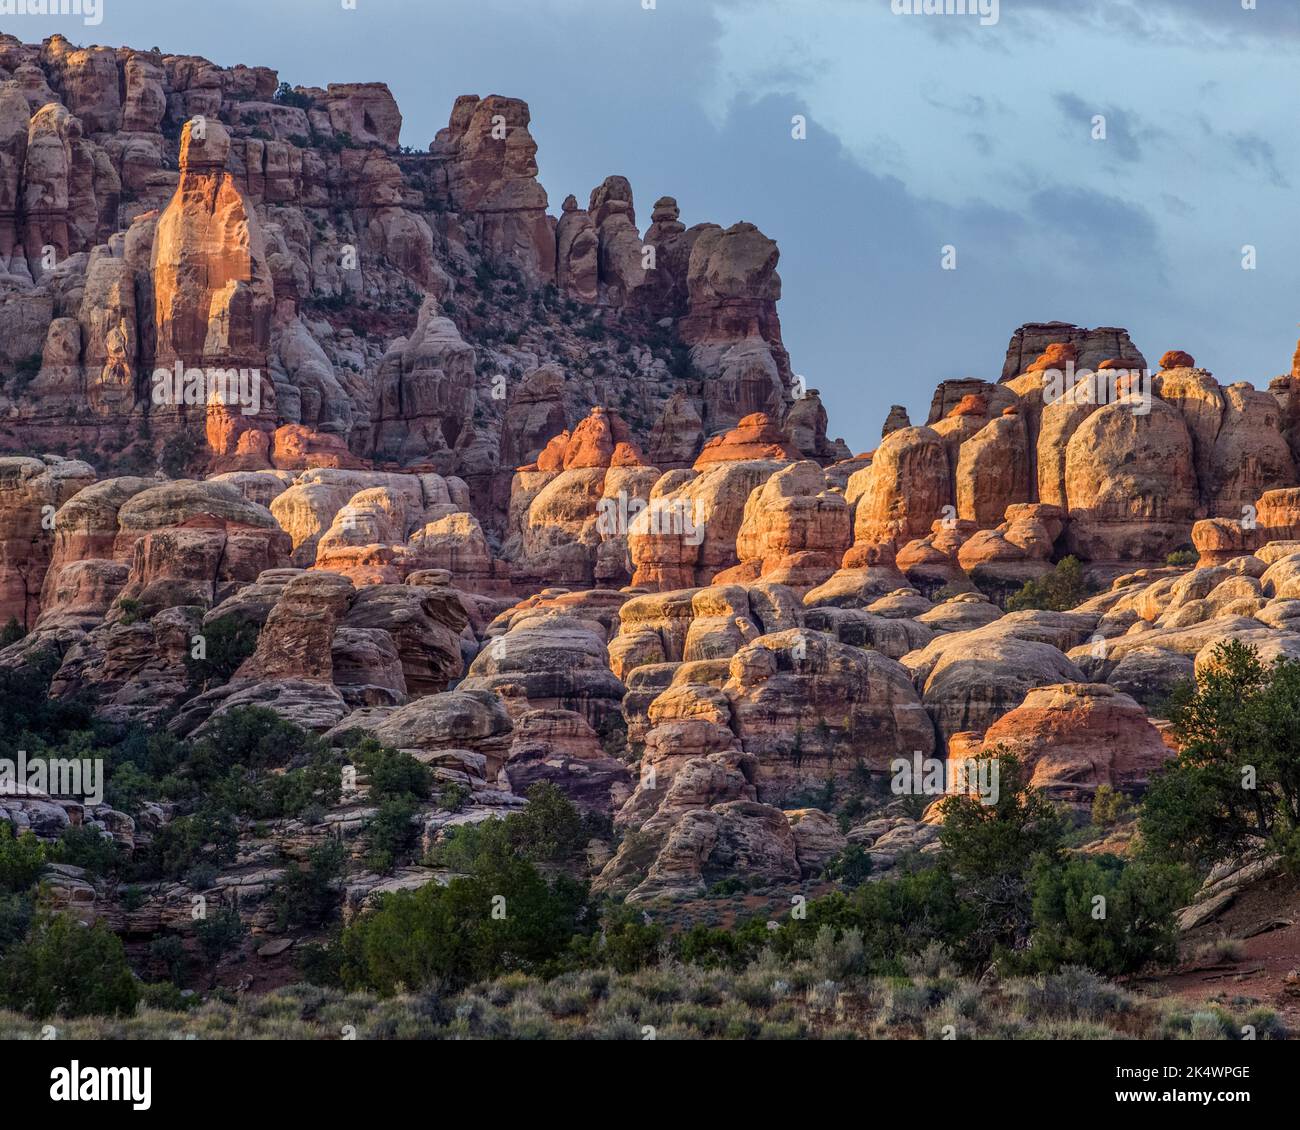 The Needles, Cedar Mesa sandstone spires, at sunrise in the Needles District of Canyonlands National Park, Utah. Stock Photo